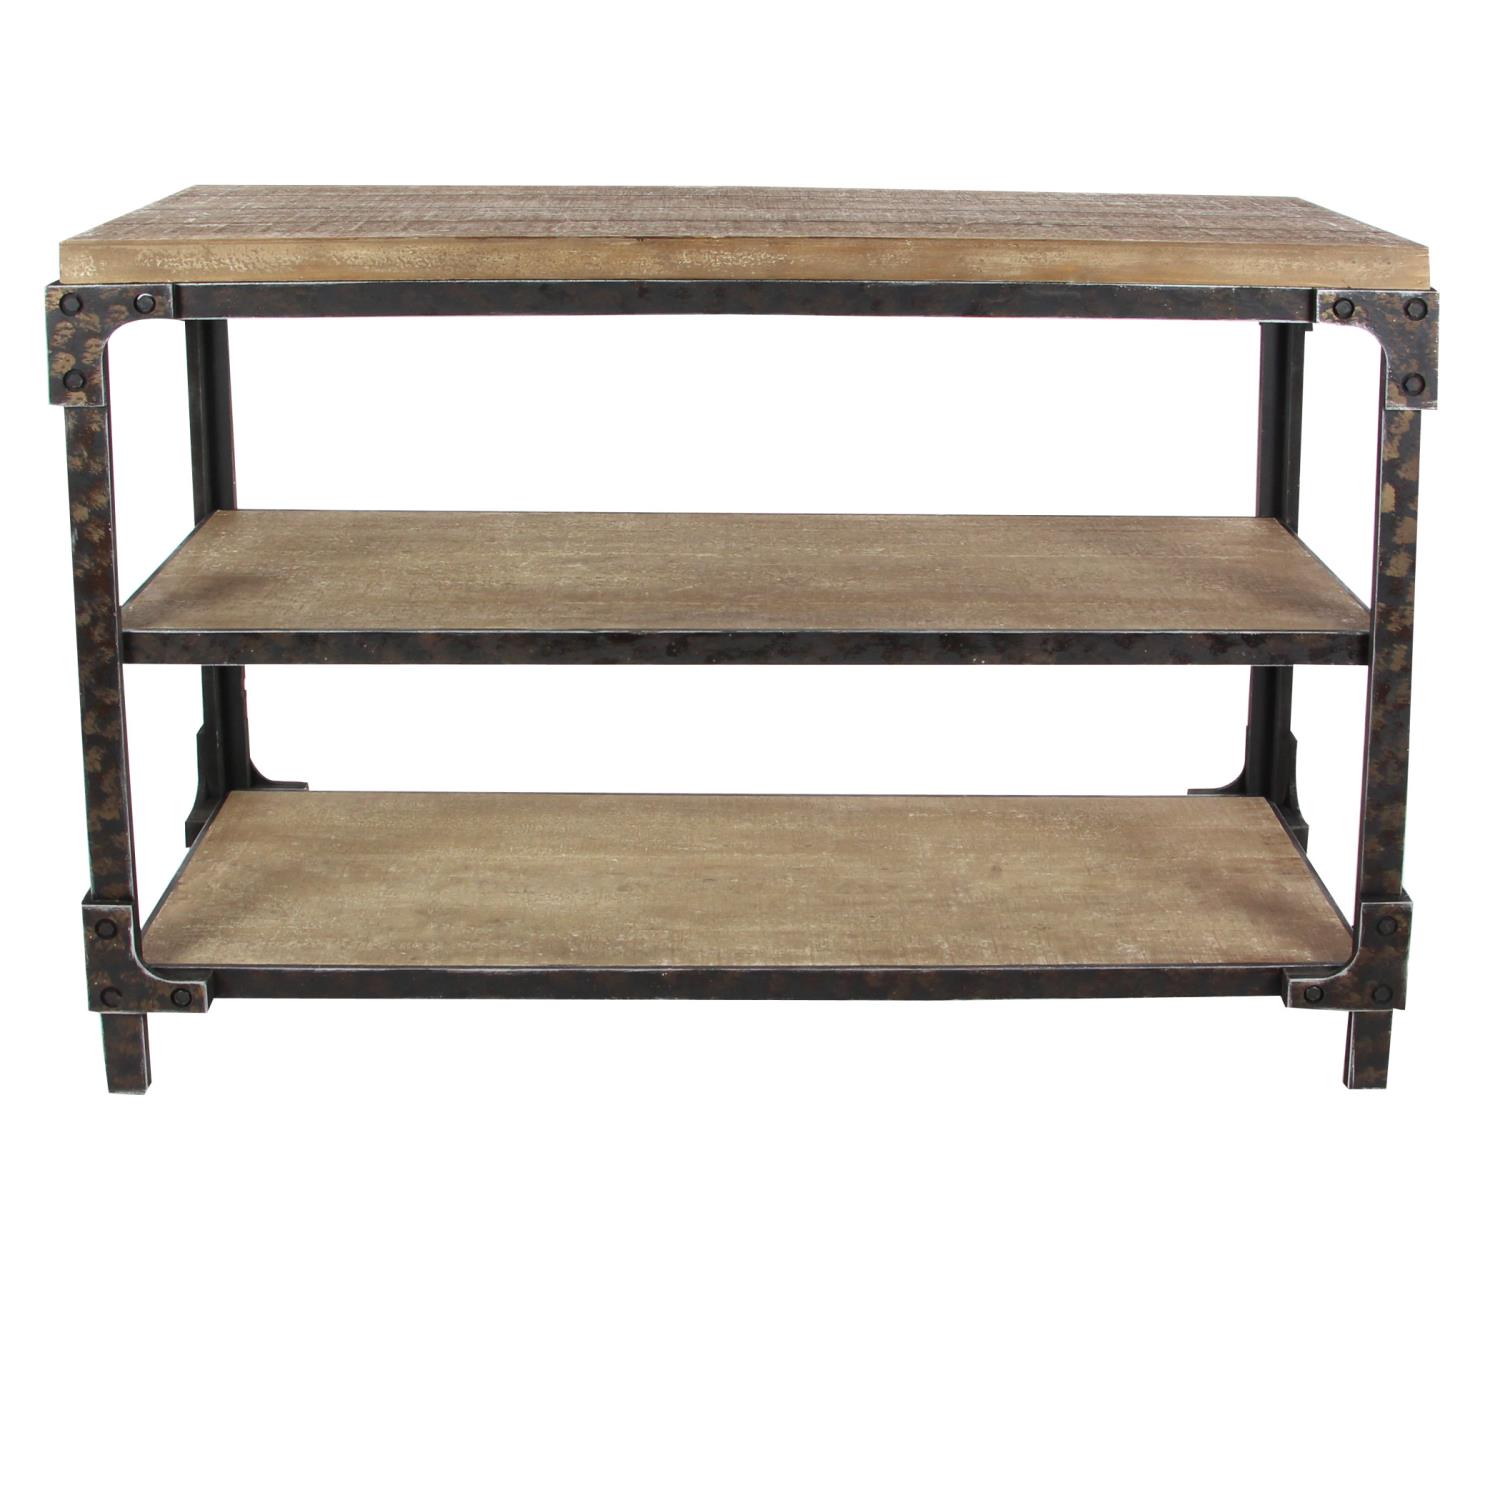 Zimlay Rustic Rectangular Three-Tier Wooden Console Table 86001